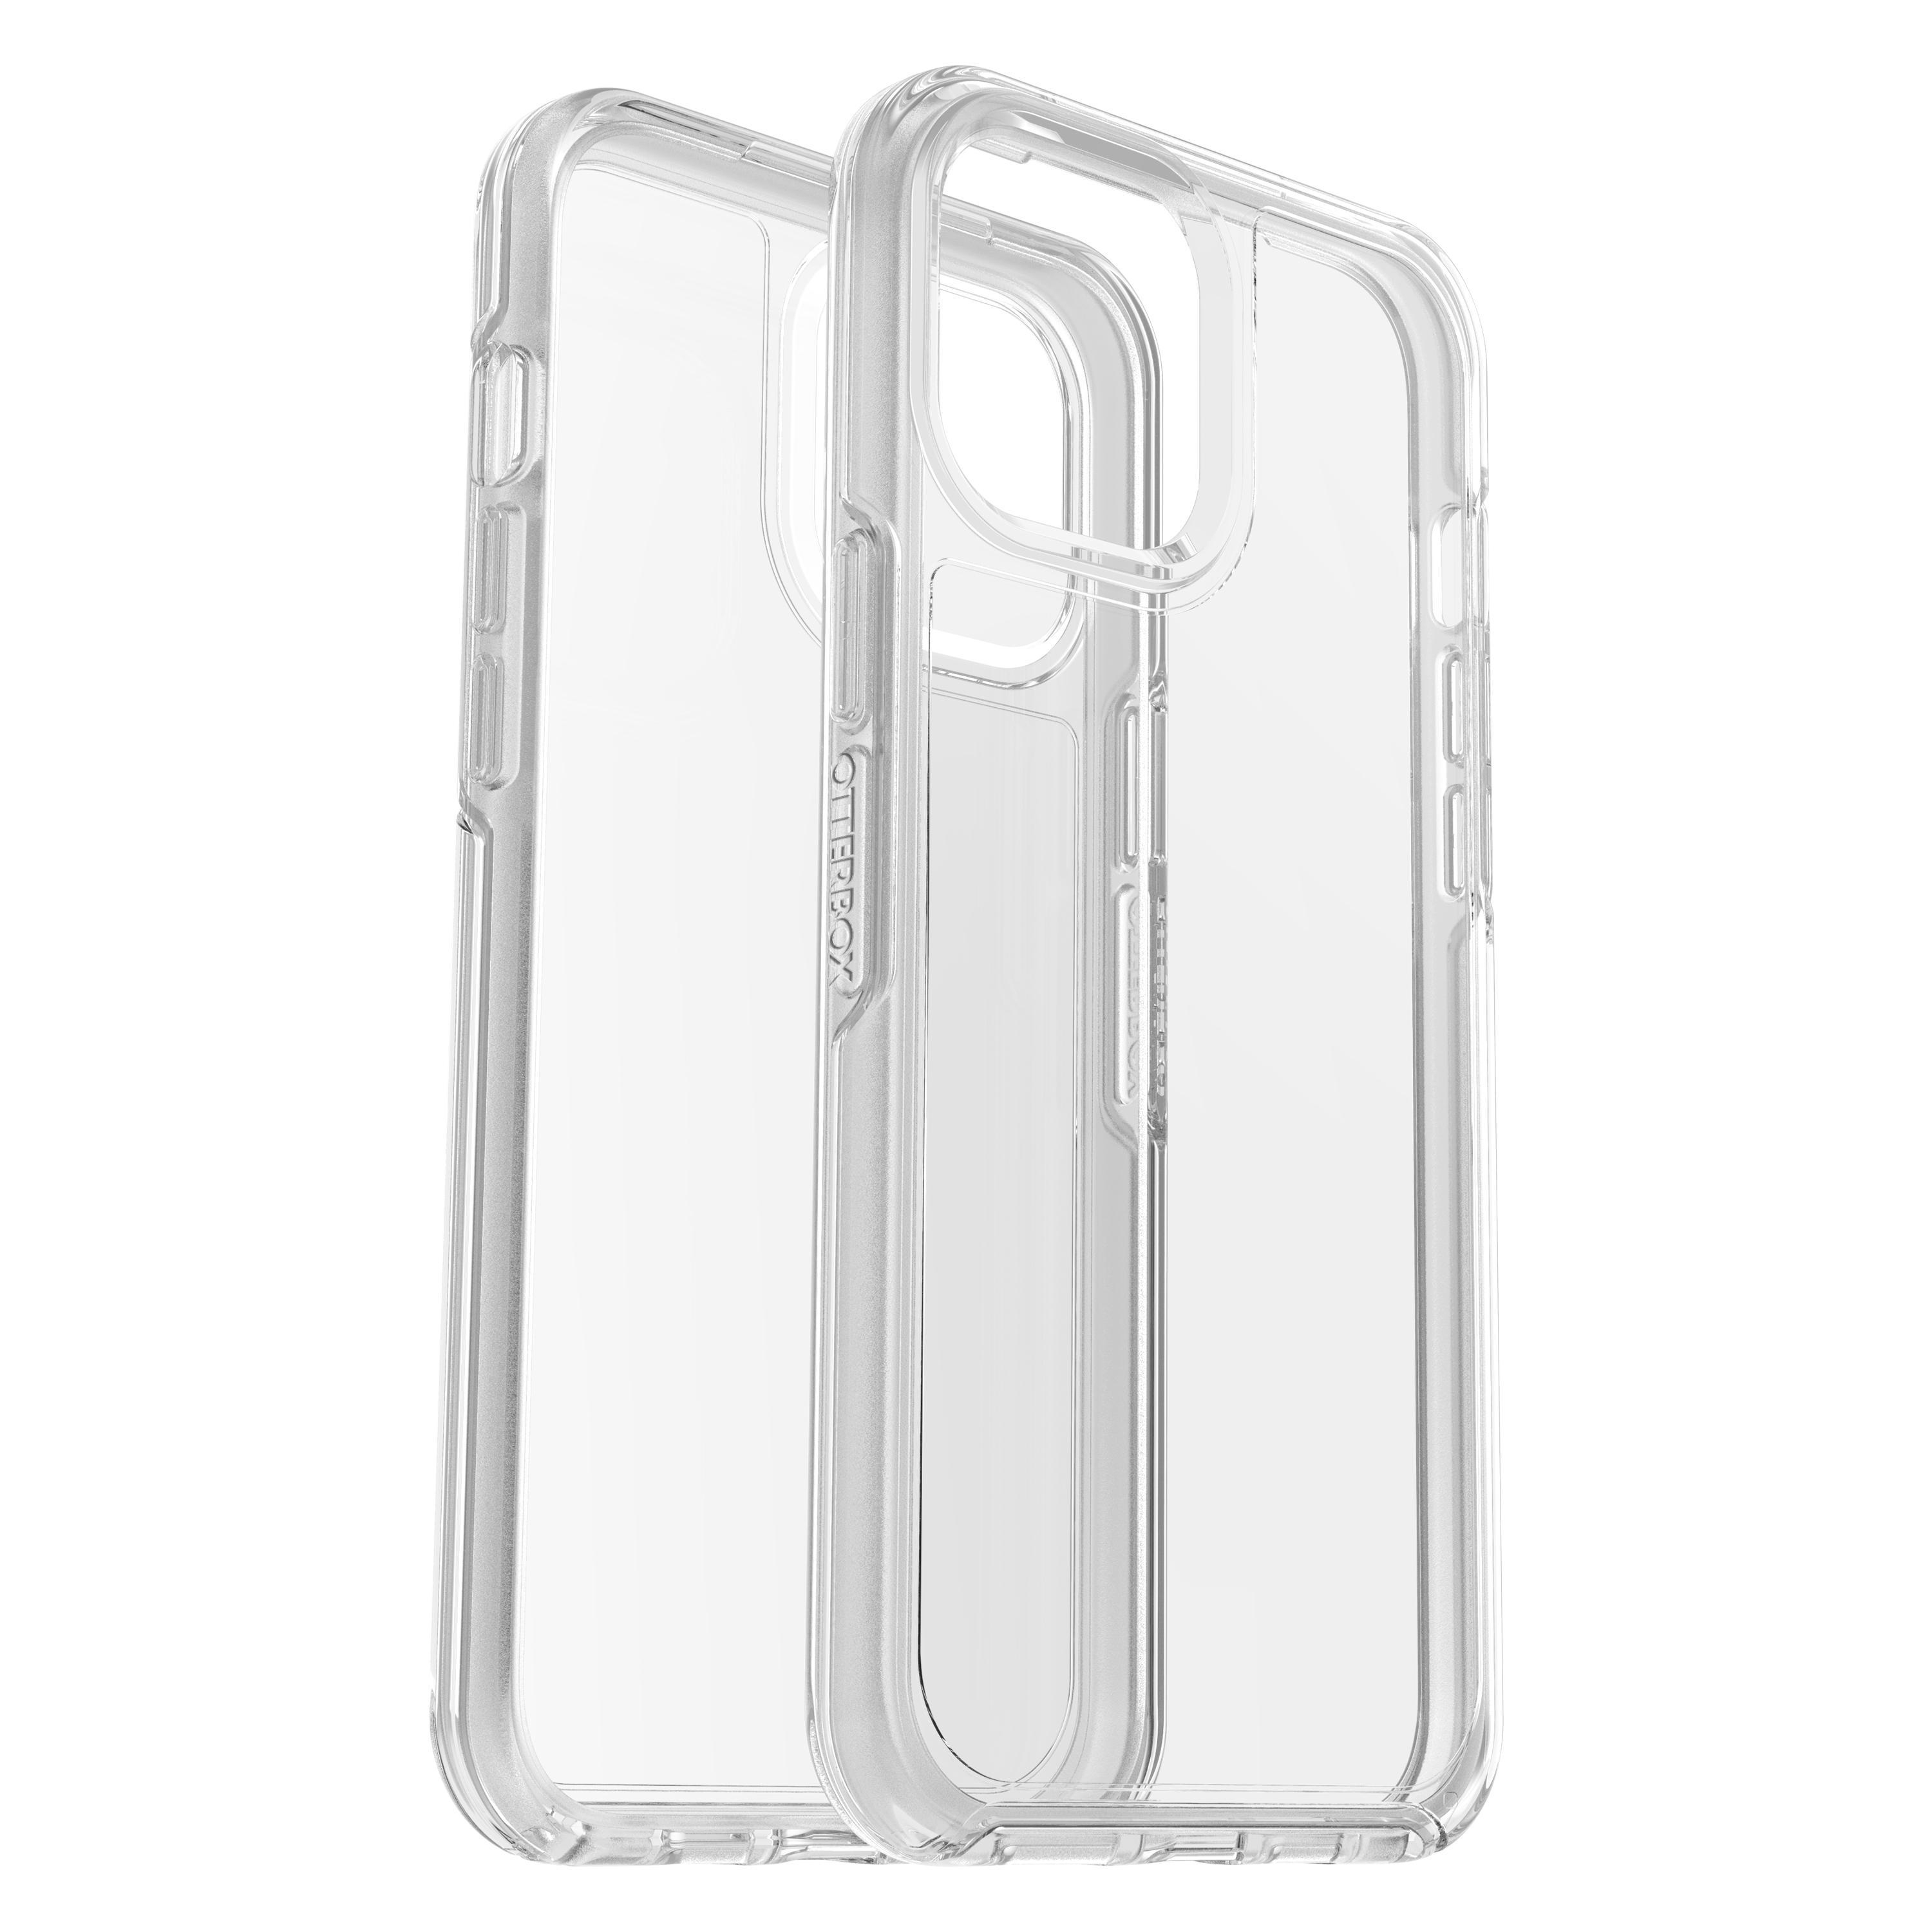 12 Glass, Transparent Pro Apple, Alpha Max, Symmetry + Clear OTTERBOX iPhone Backcover,